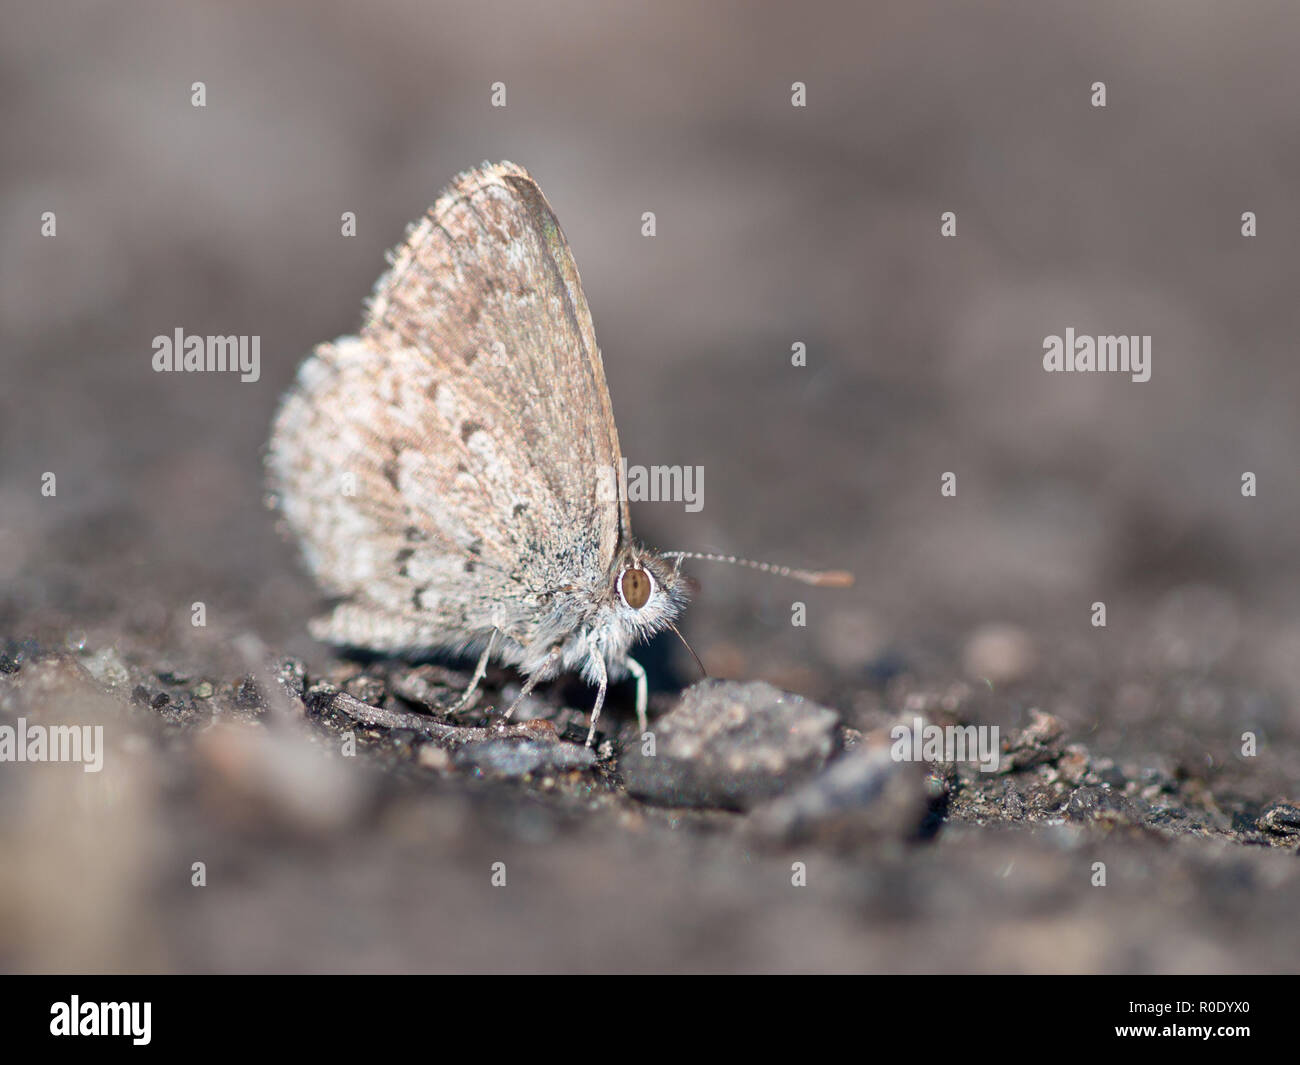 New Zealand Southern Blue (Zizina oxleyi) butterfly on drinking minerals on grey background Stock Photo